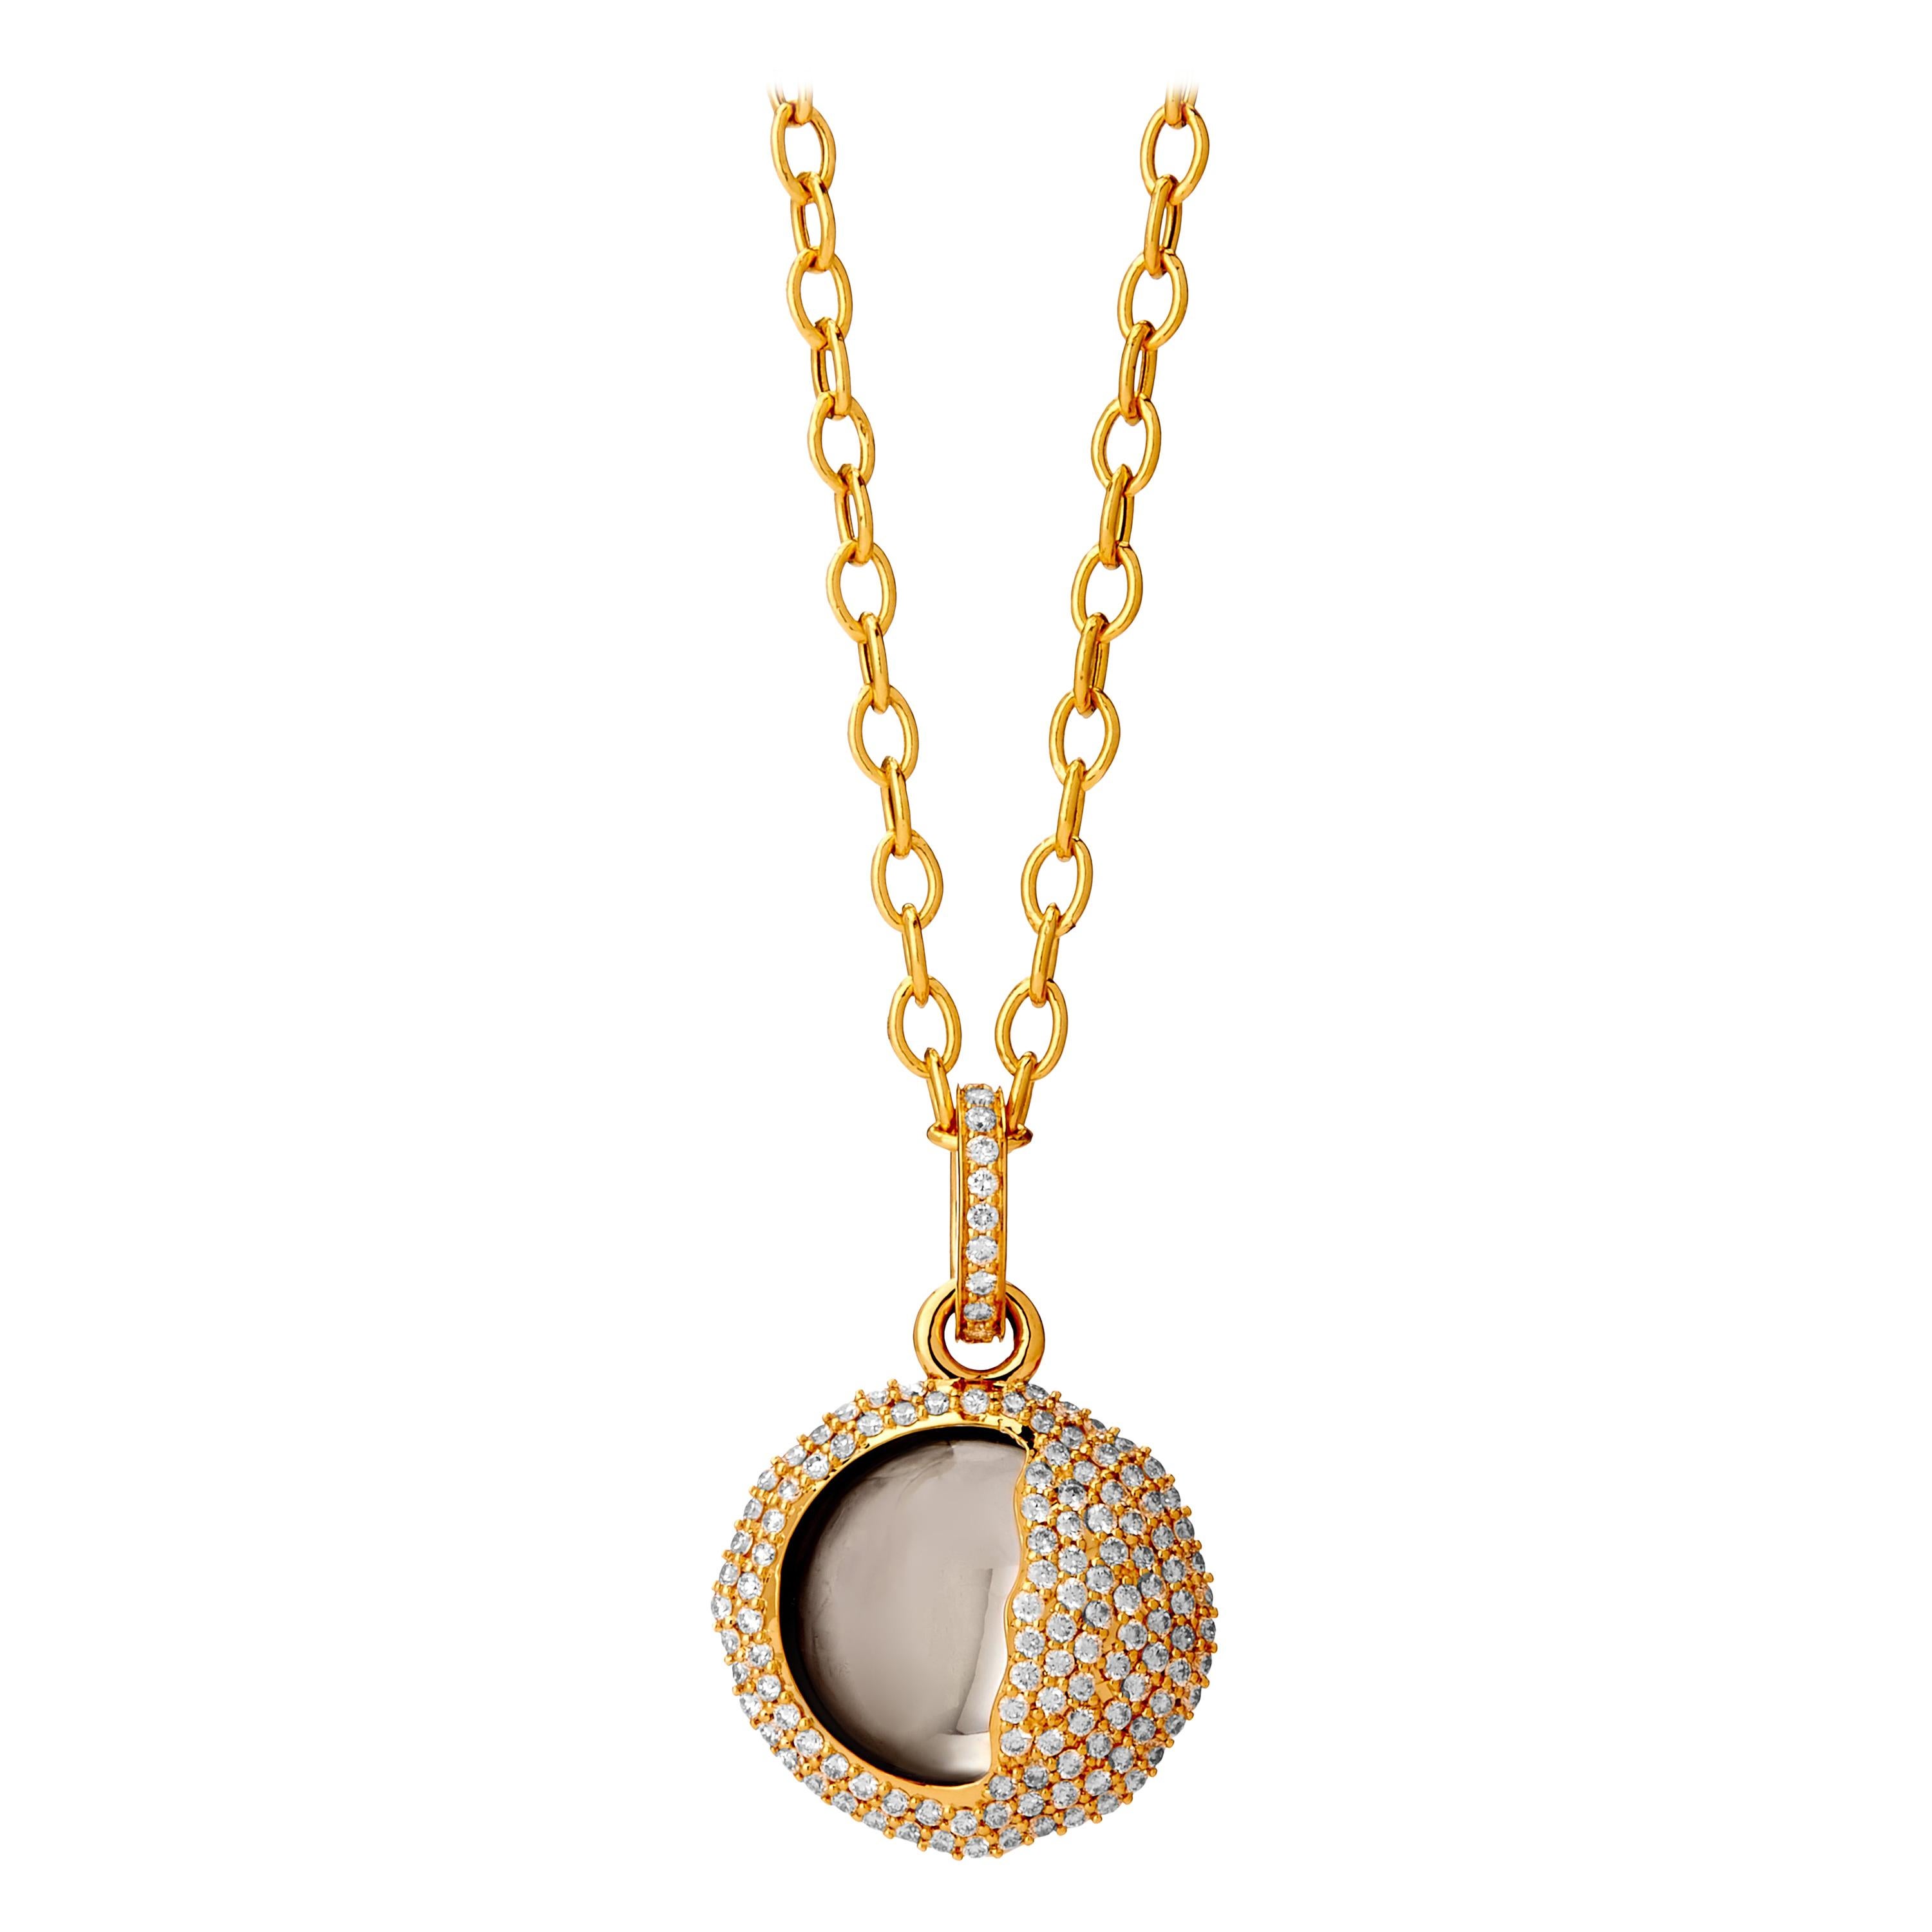 Syna Yellow Gold Eclipse Pendant with Rock Crystal and Diamonds